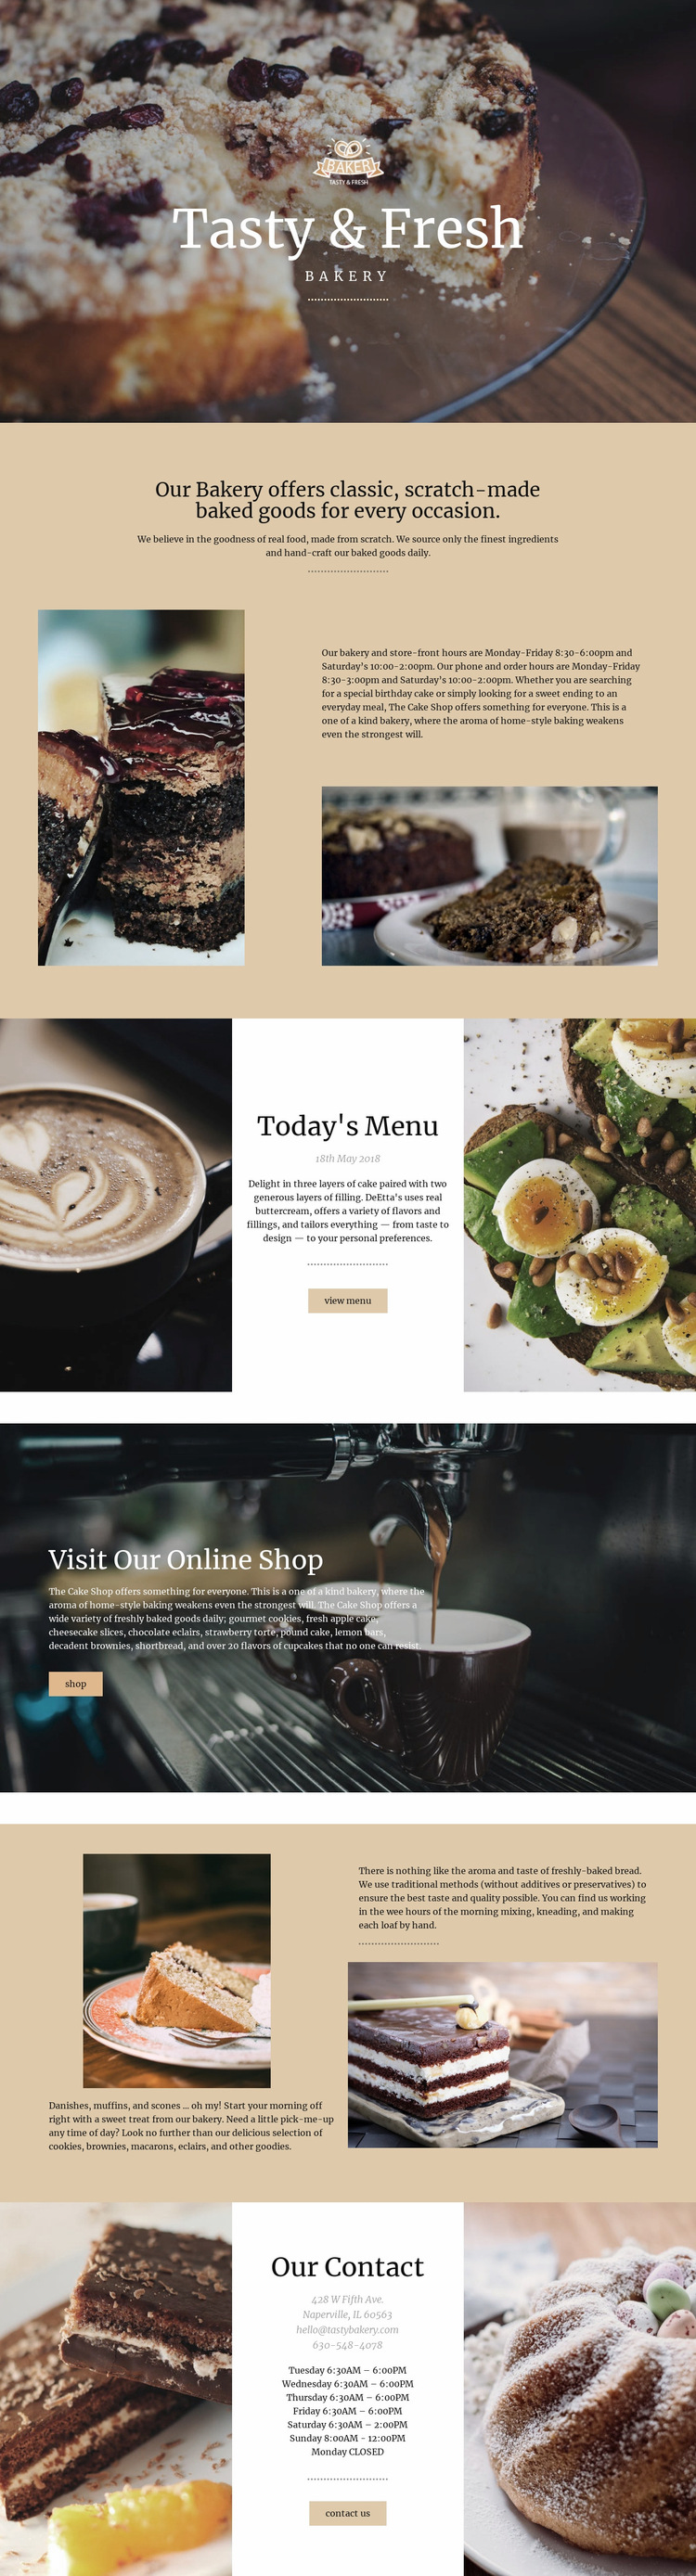 Tasty and fresh food Web Page Design